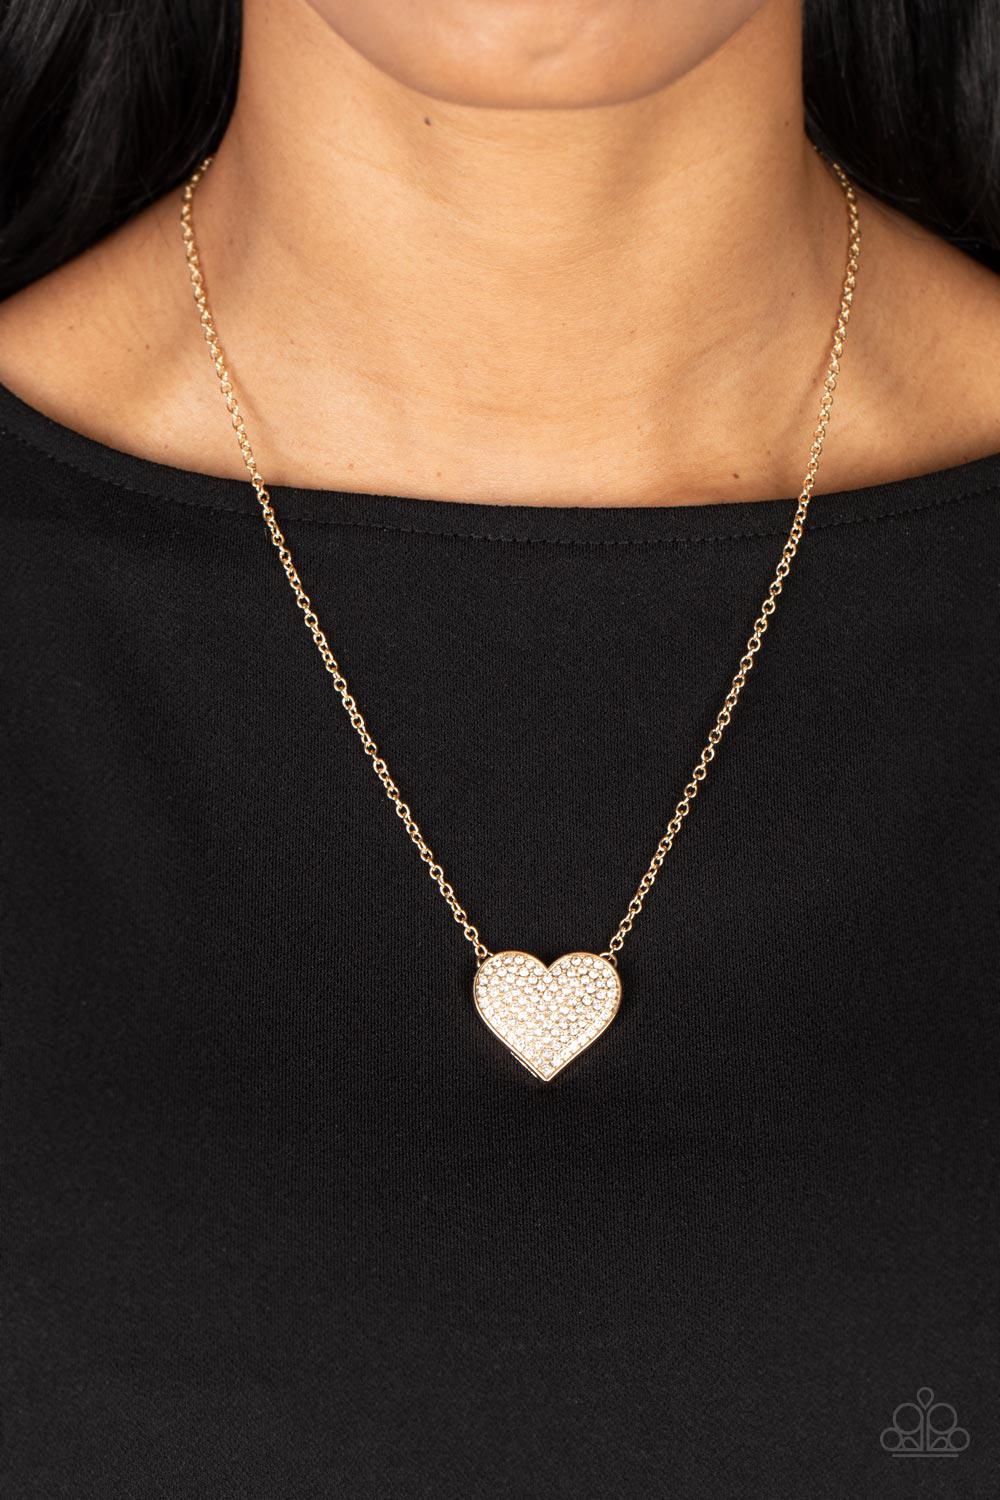 Spellbinding Sweetheart Gold &amp; White Rhinestone Heart Necklace - Paparazzi Accessories-on model - CarasShop.com - $5 Jewelry by Cara Jewels